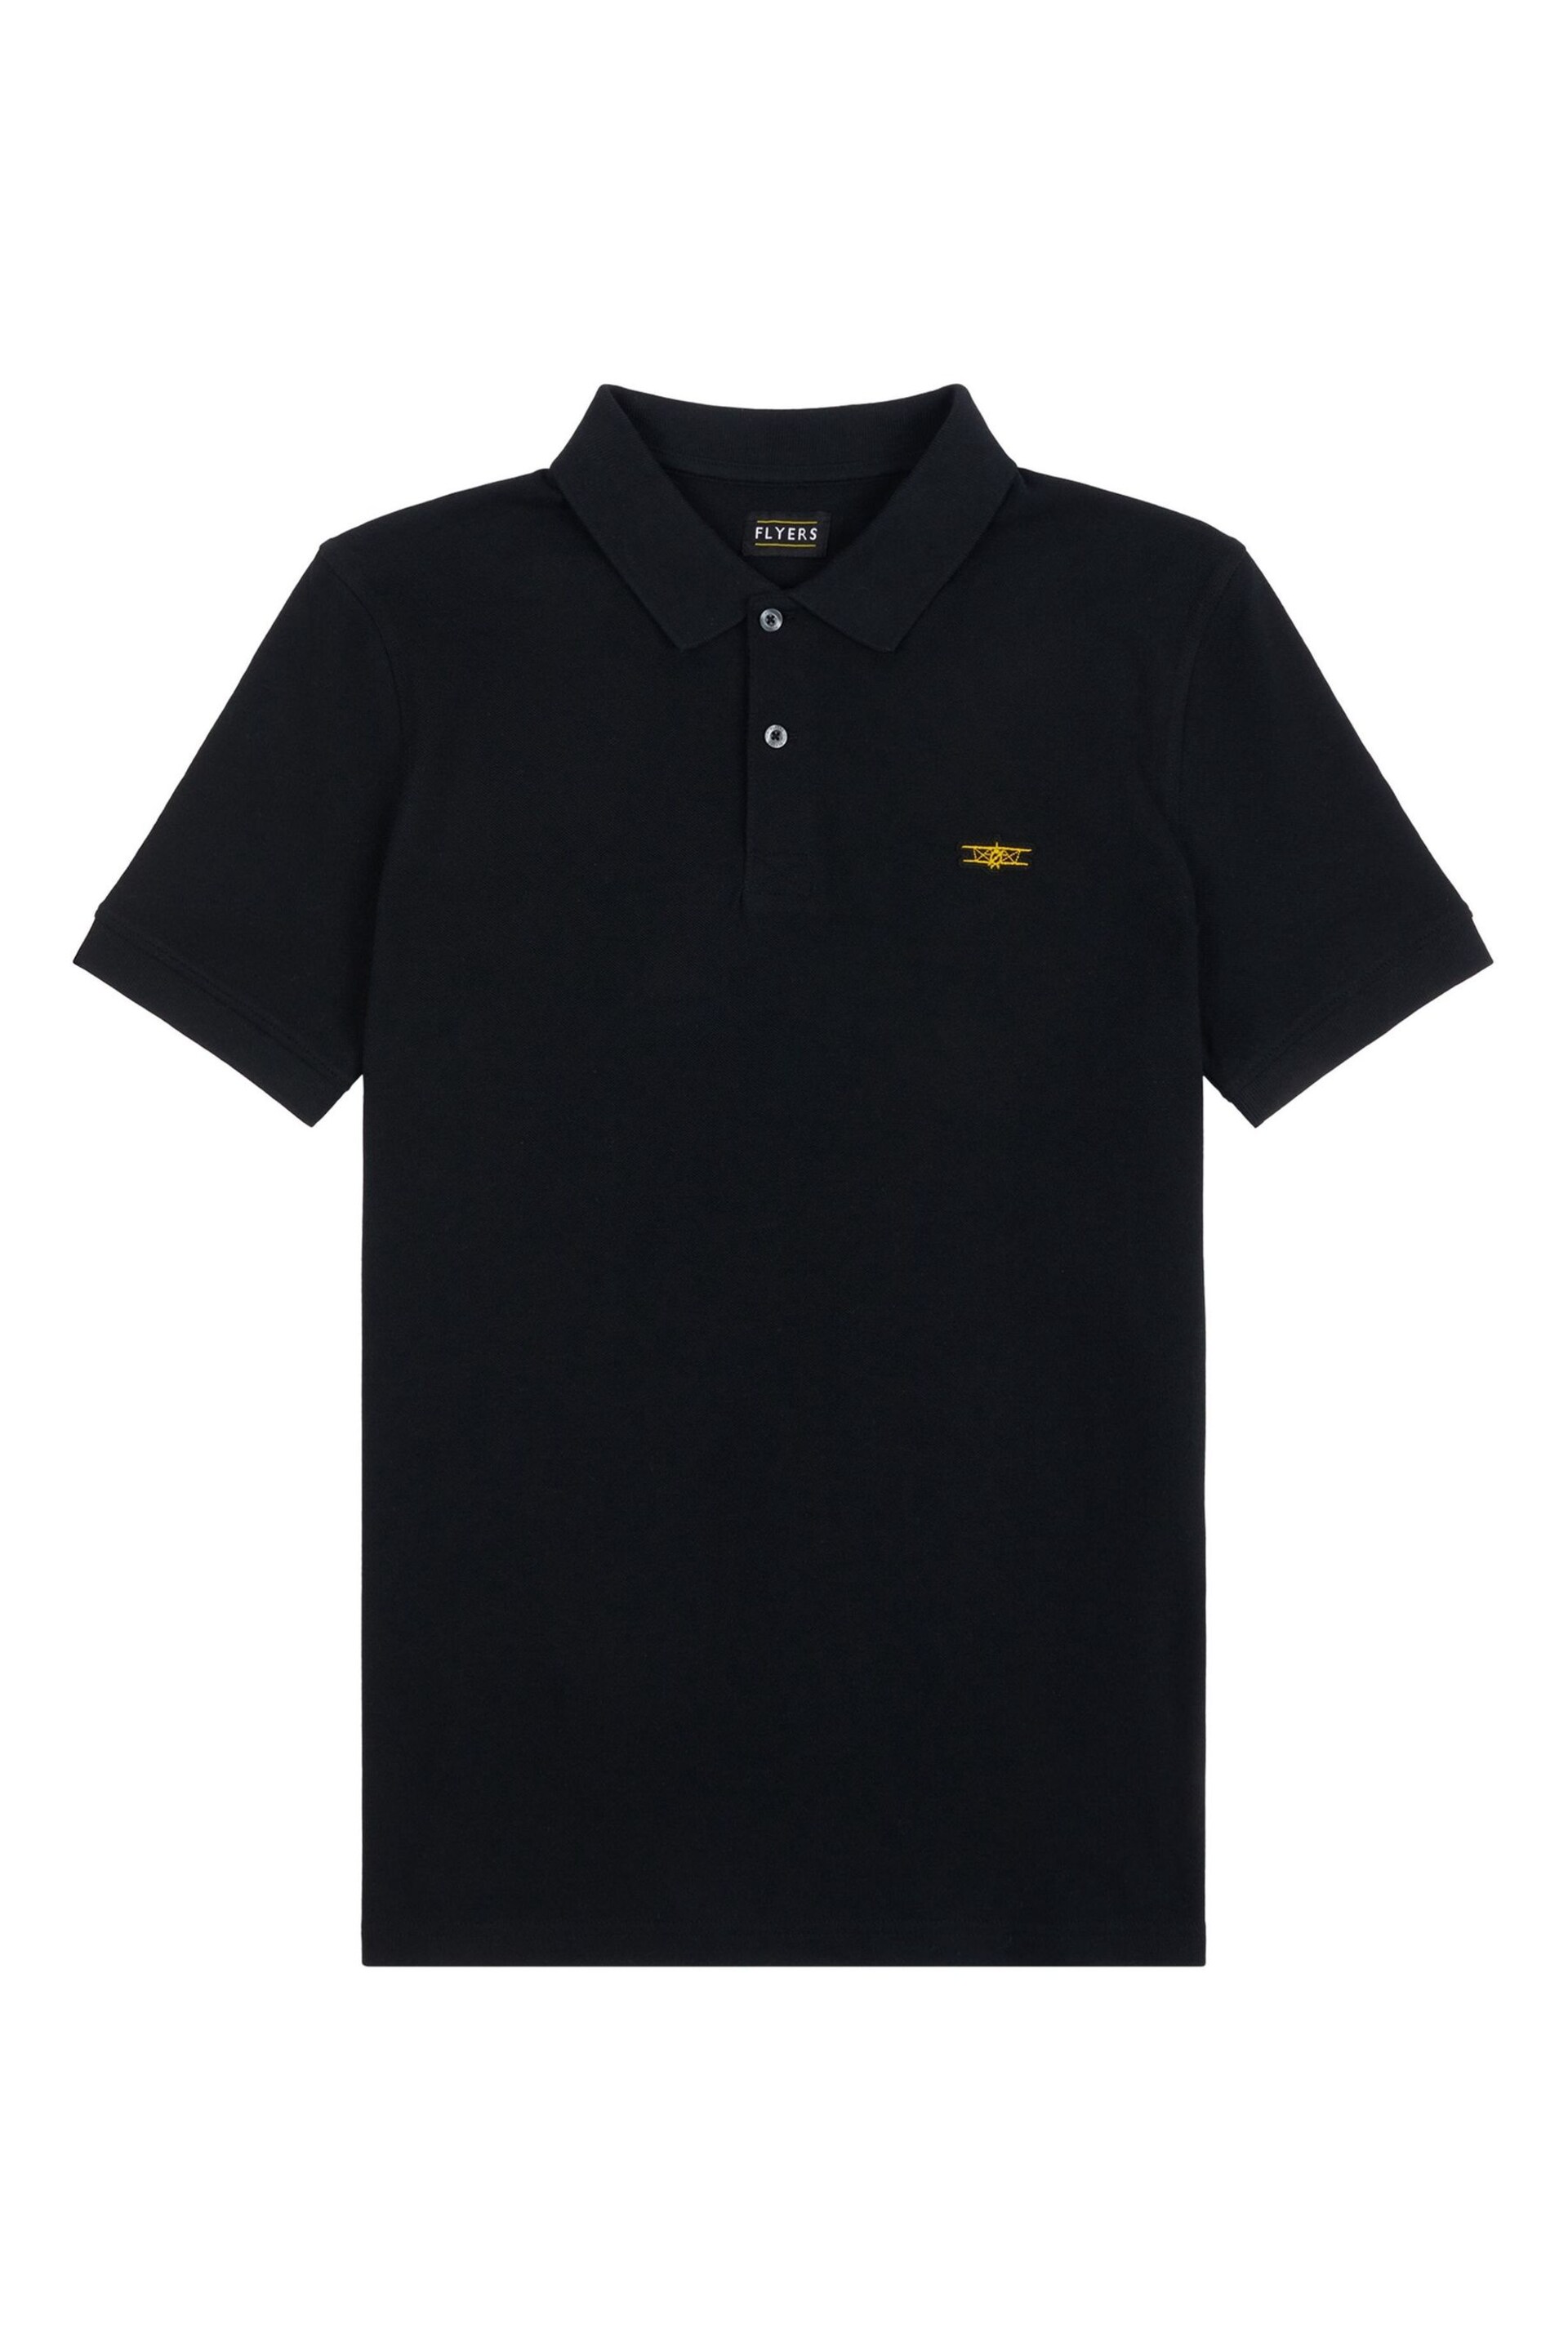 Flyers Mens Classic Fit Polo Shirt - Image 7 of 9